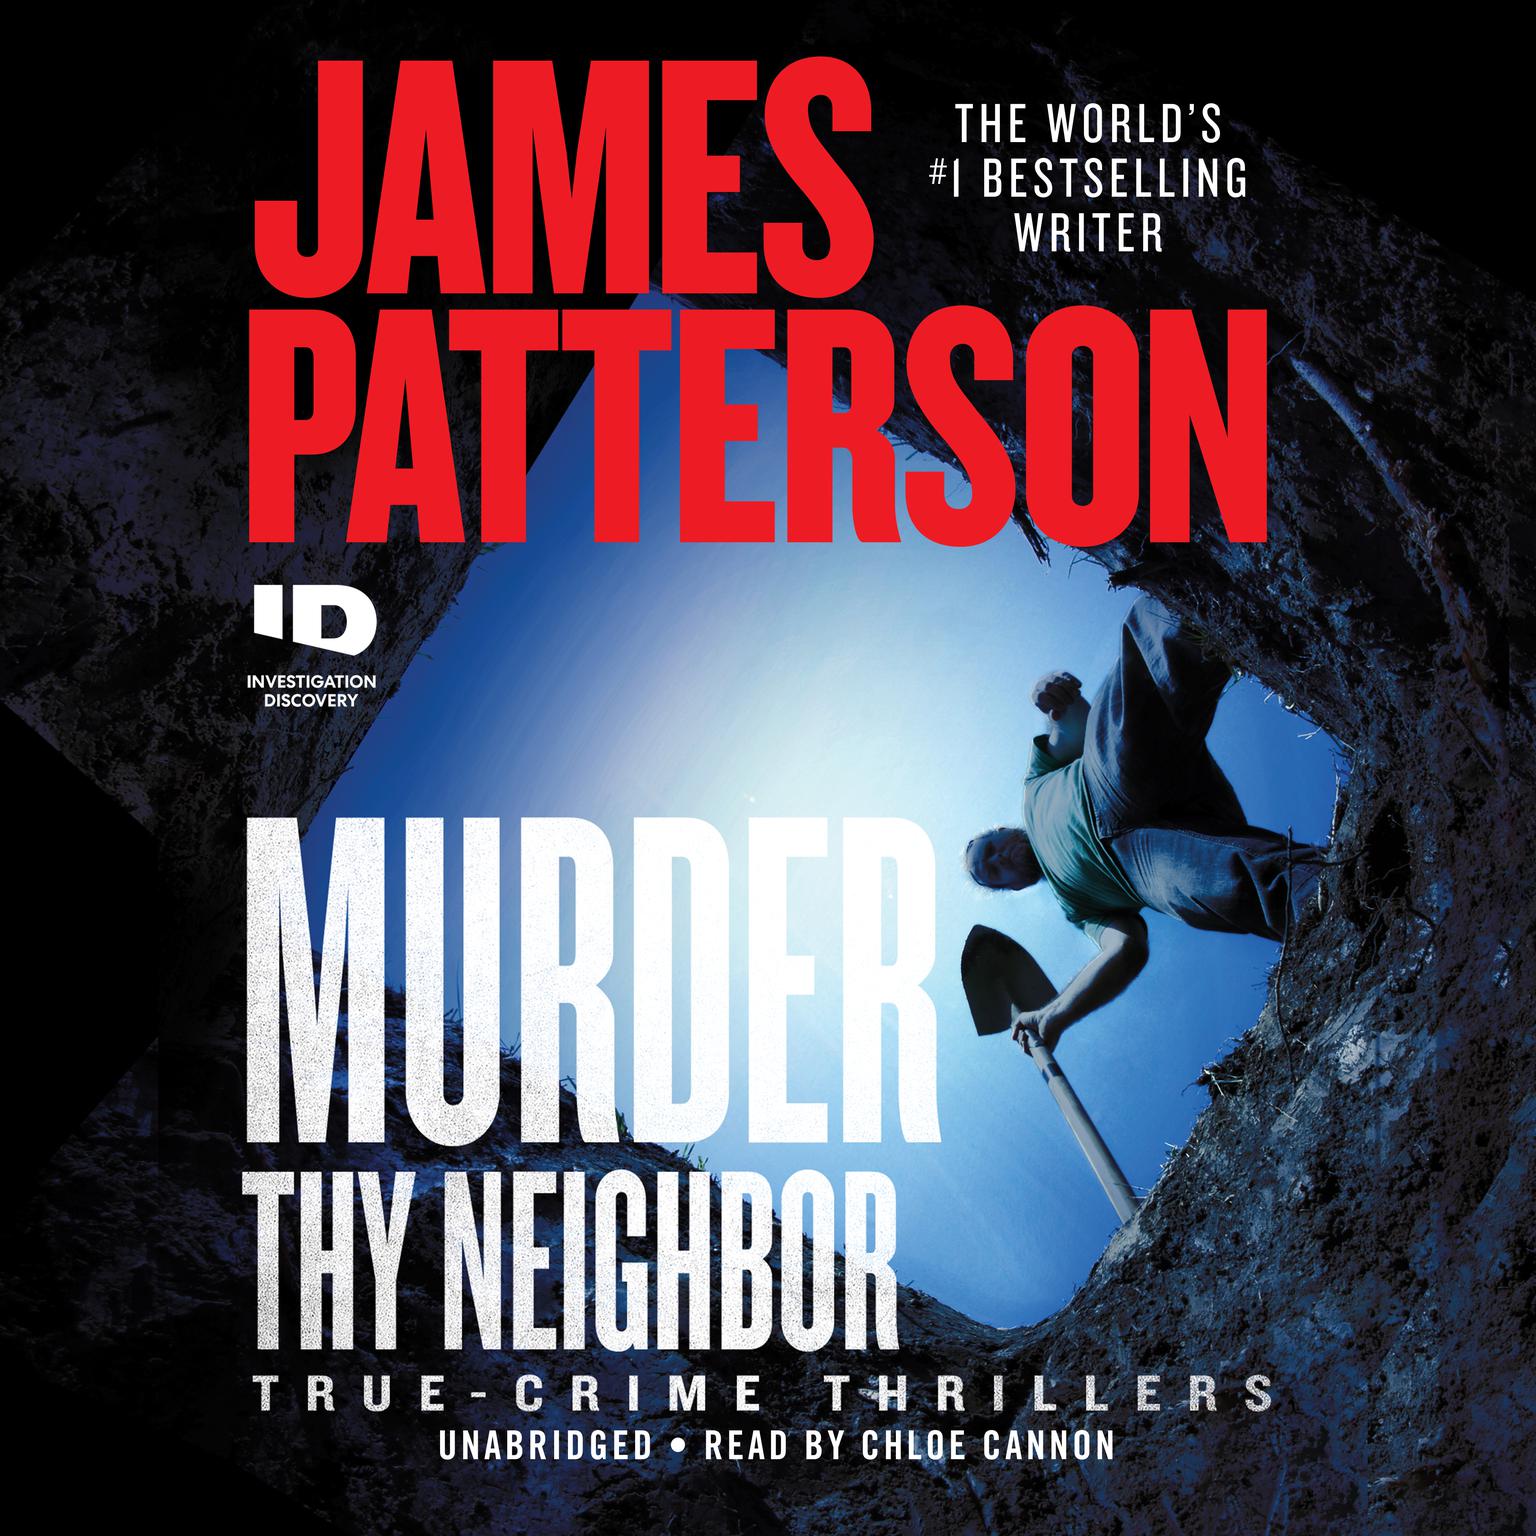 Murder Thy Neighbor Audiobook, by James Patterson